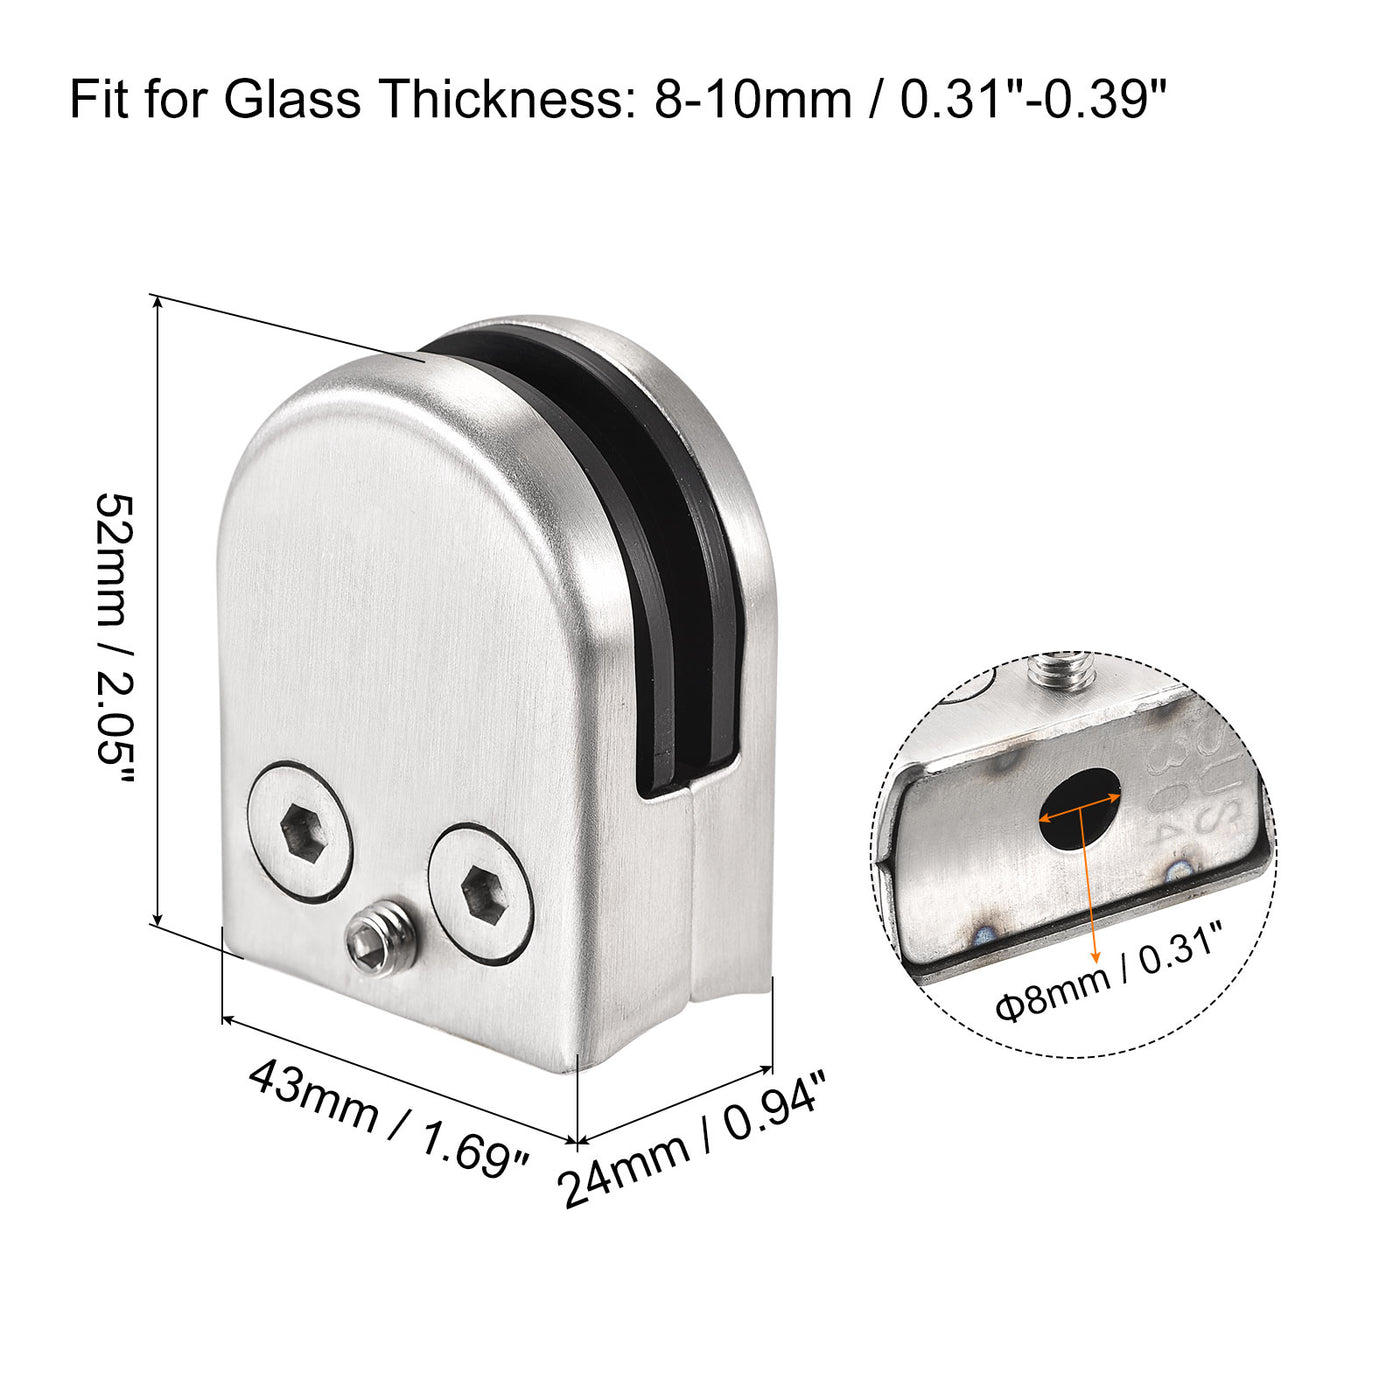 Uxcell Uxcell Glass Clamp 2pcs for 10-12mm Thick 65x43mm 304 Stainless Steel Glass Clip